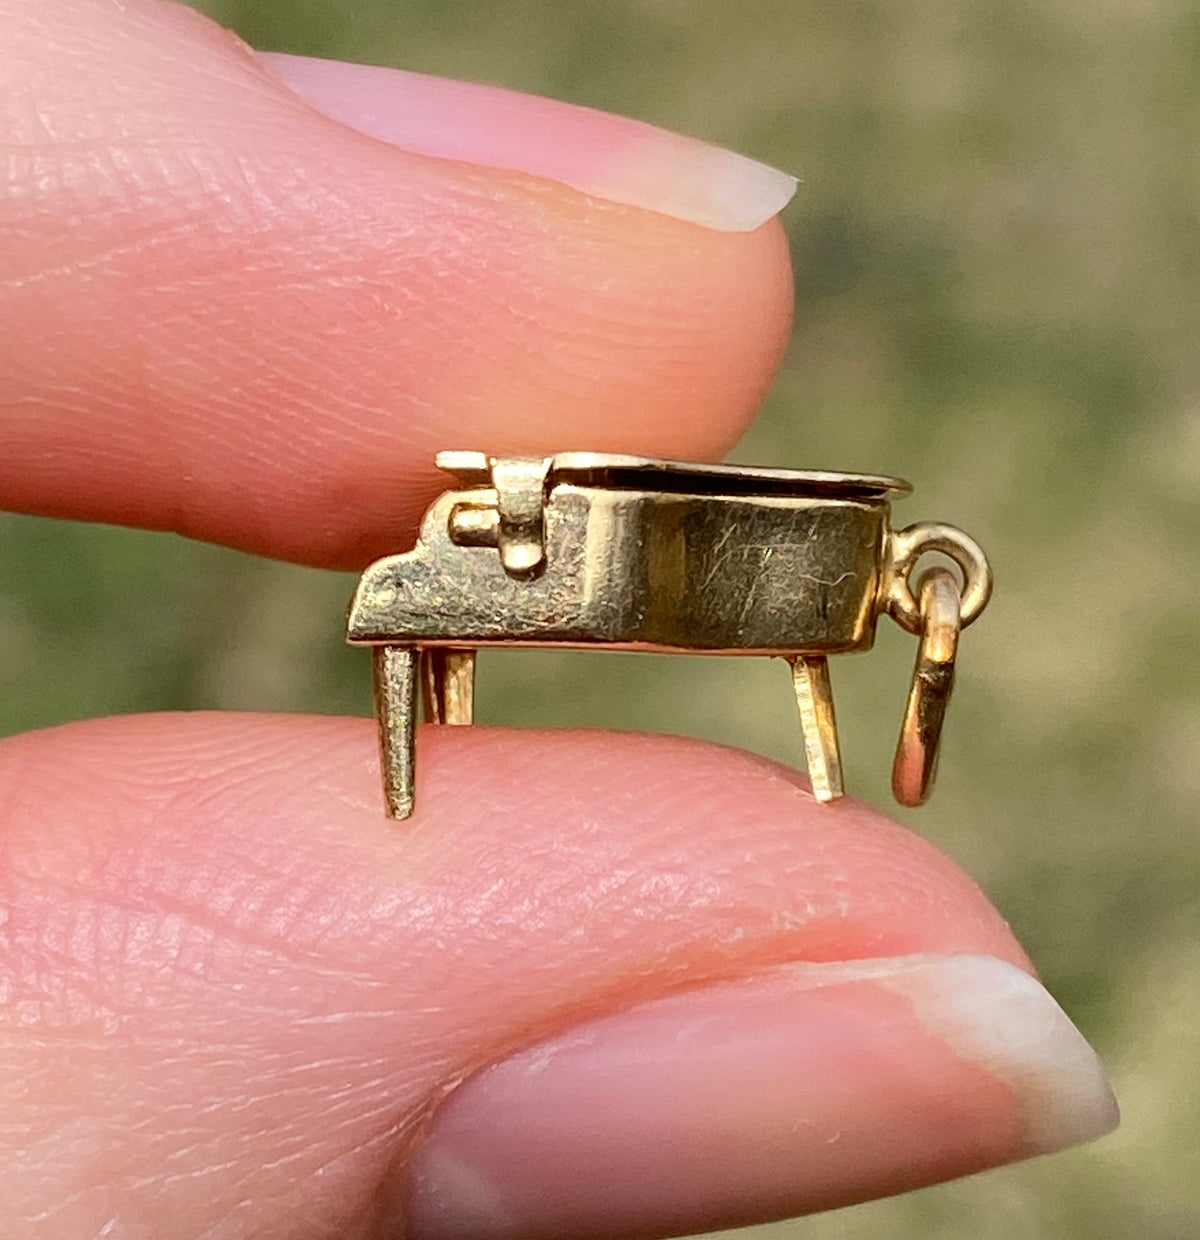 Vintage 14K Gold and Enamel Articulated Grand Piano Charm